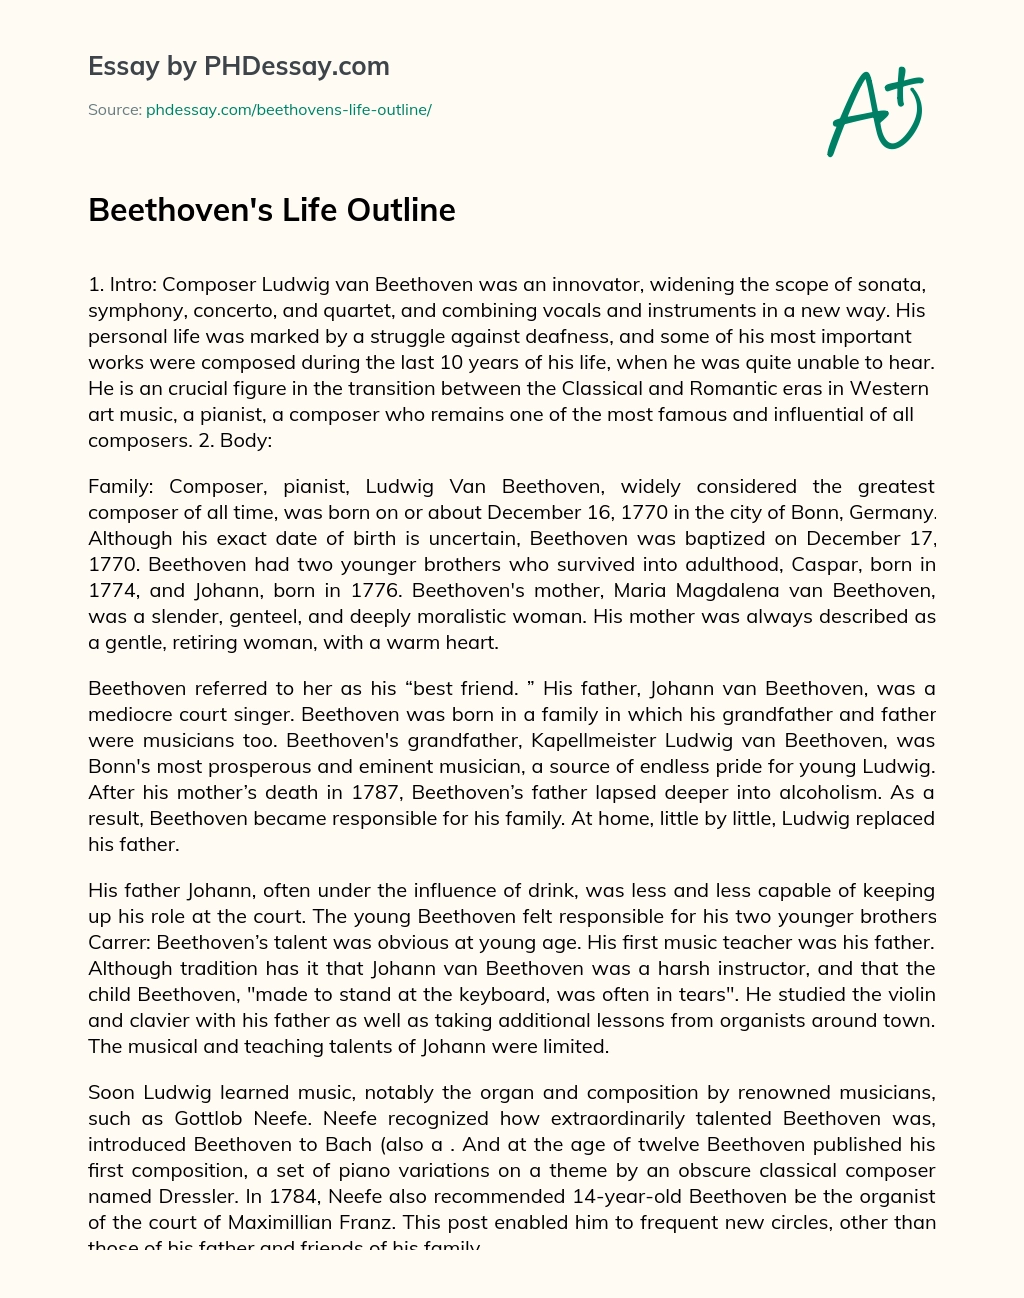 Beethoven’s Life Outline essay